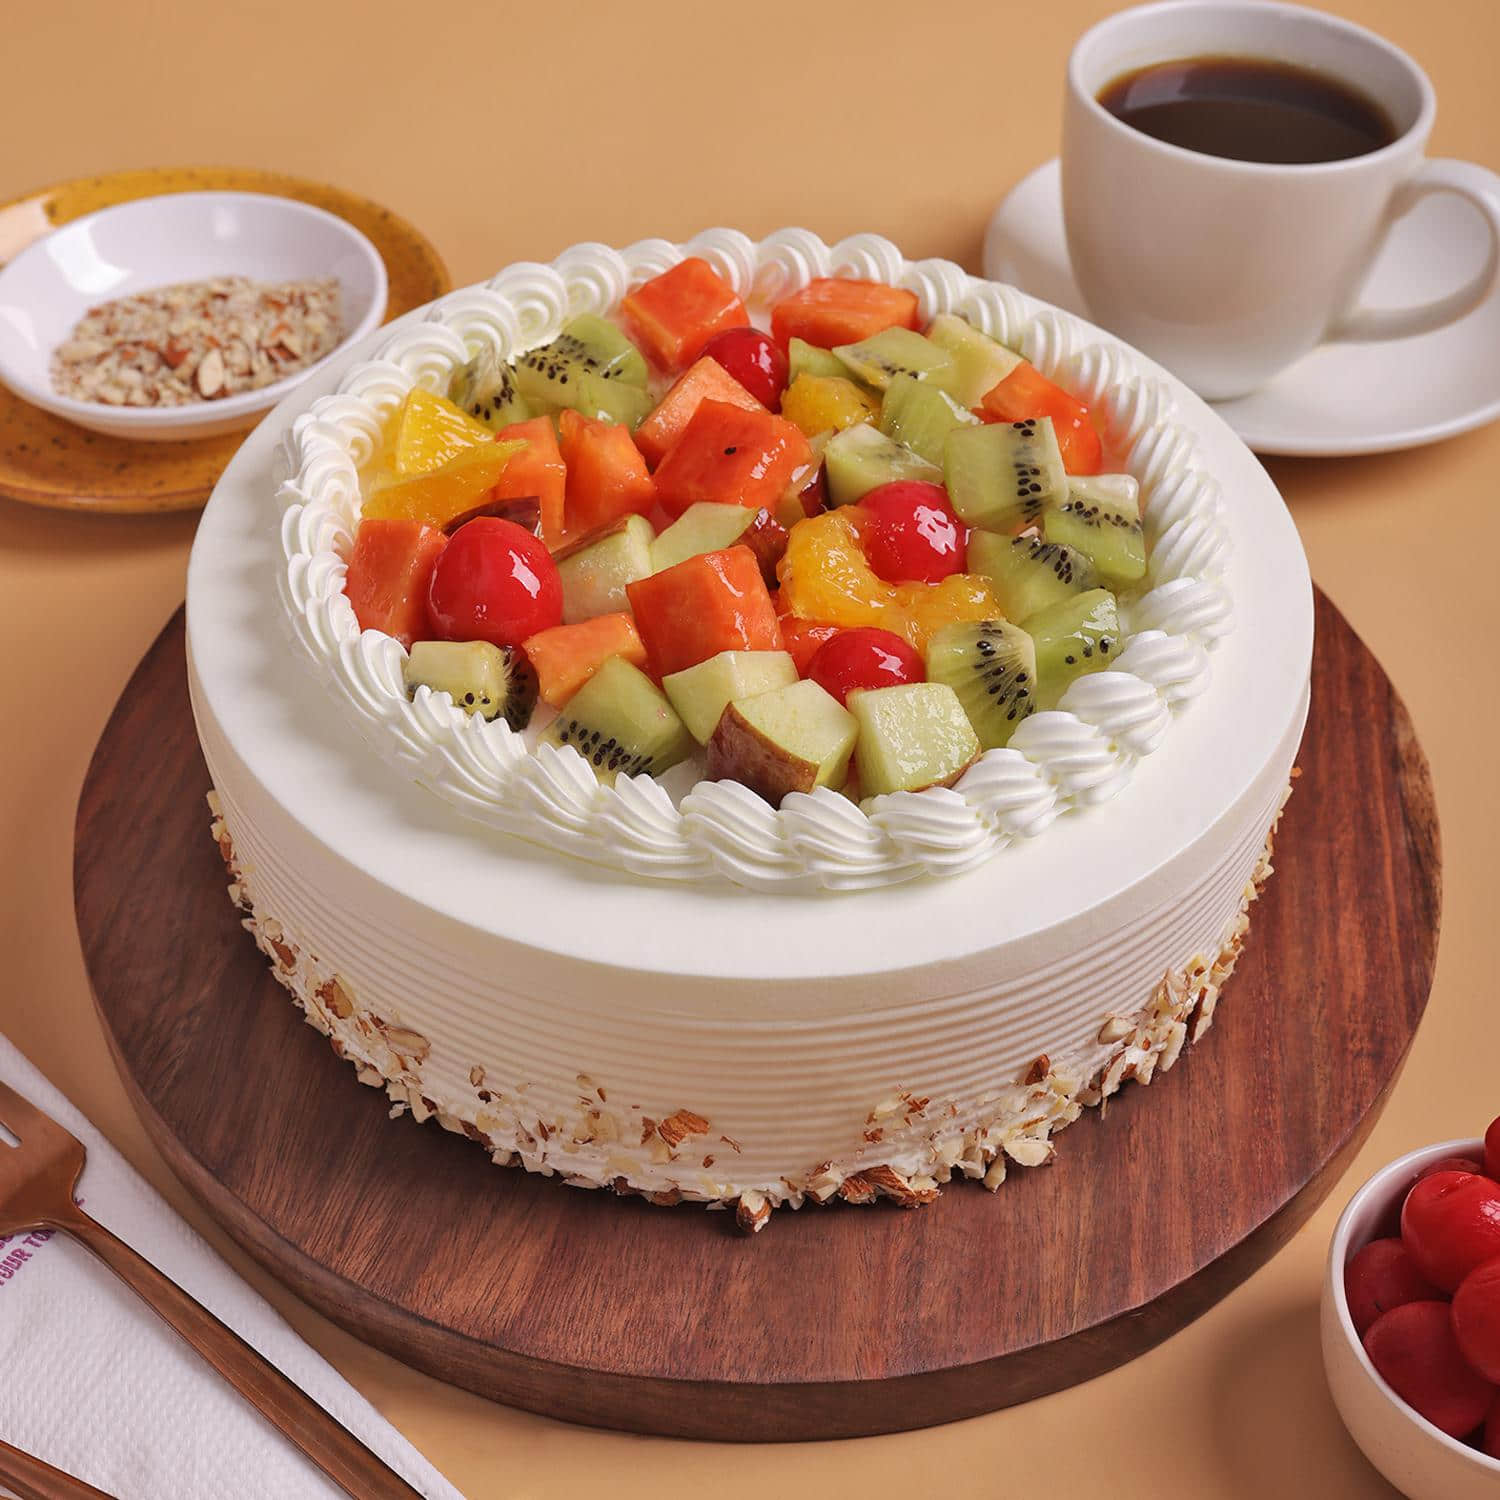 Best Doremon Cake online delivery., 24x7 Home delivery of Cake in Udaipur,  Kanpur